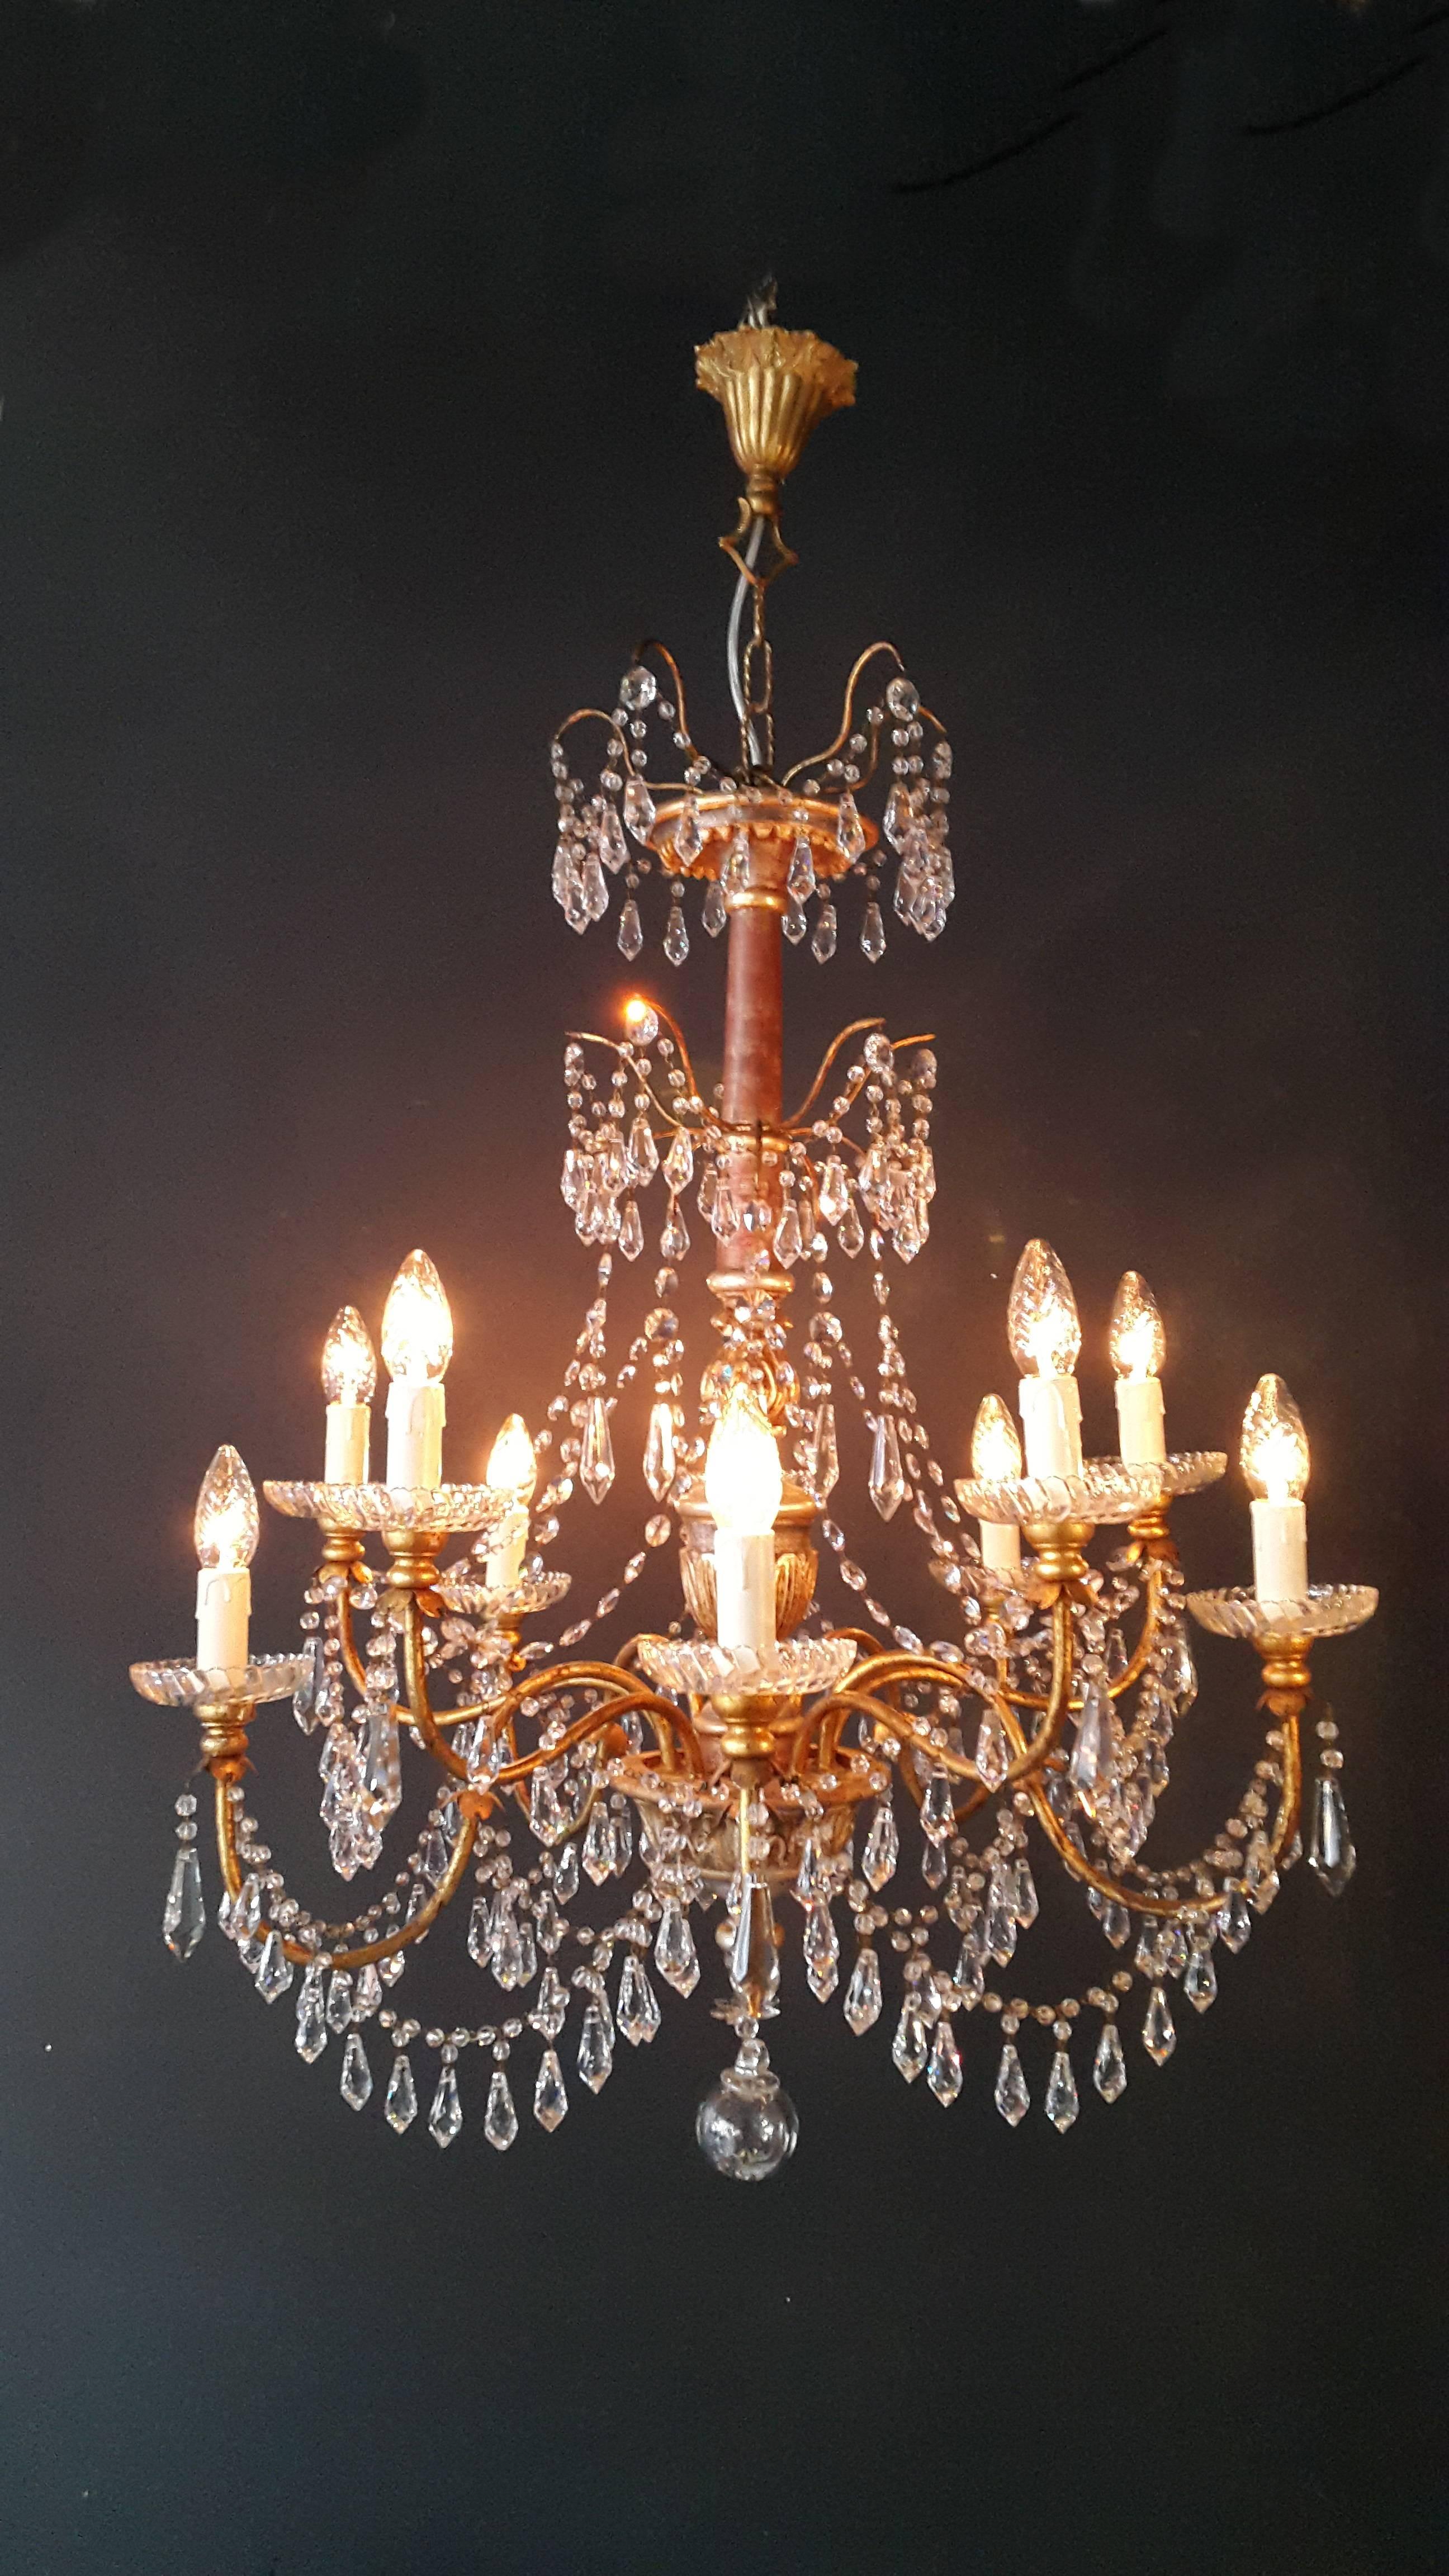 18th Century Antique Crystal Chandelier Lustre, 19th Century Wood